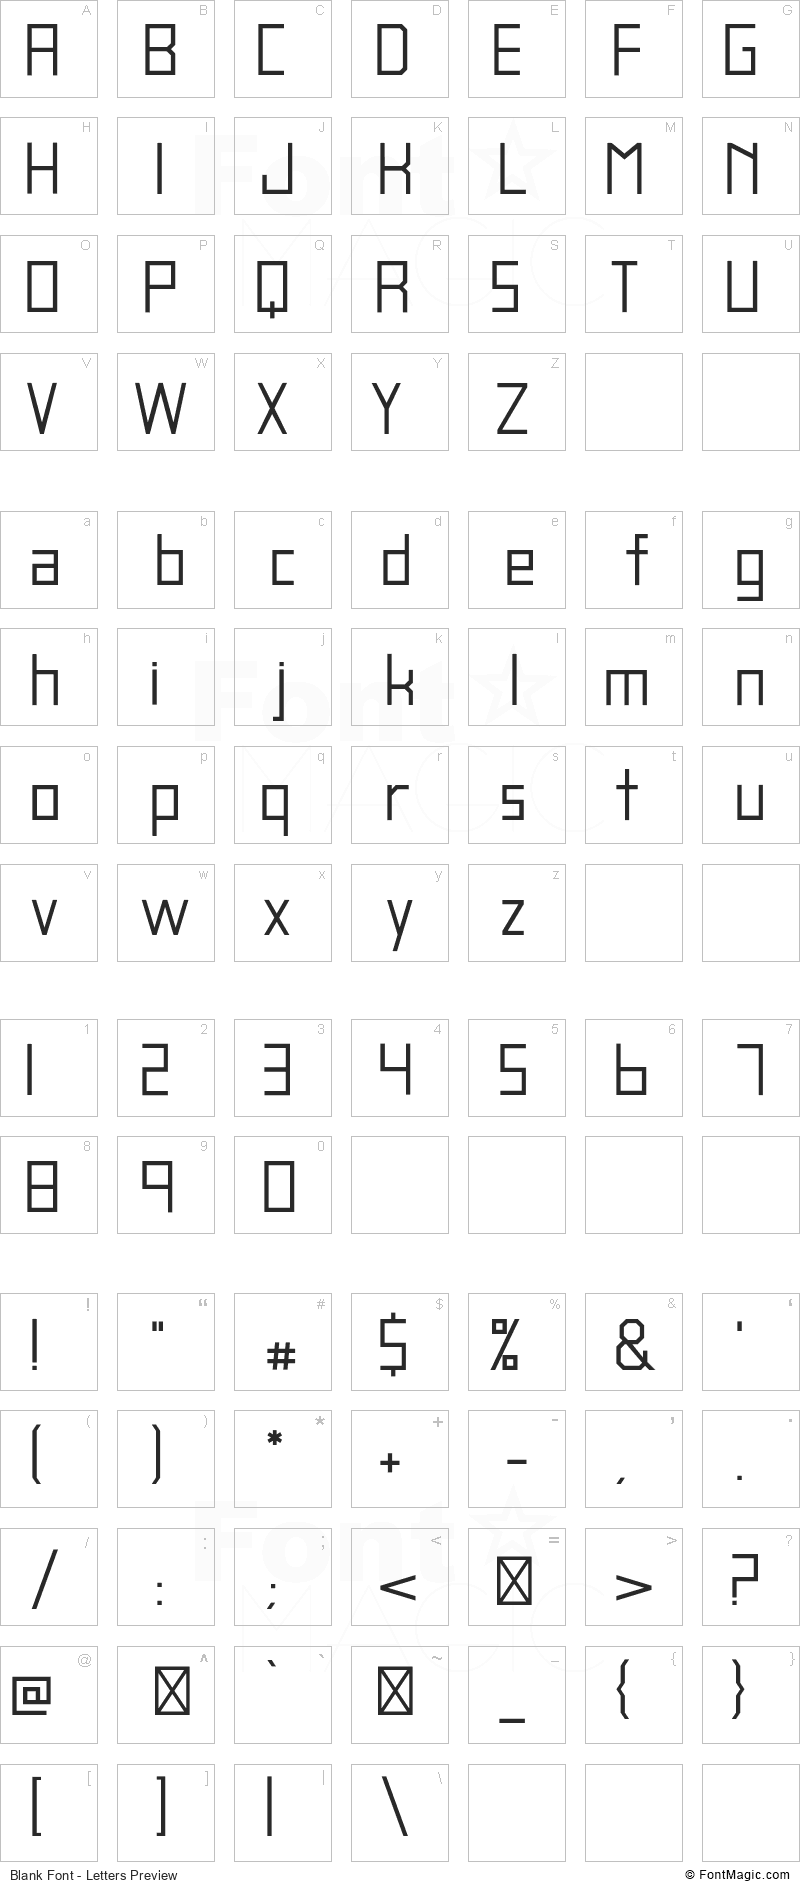 Blank Font - All Latters Preview Chart